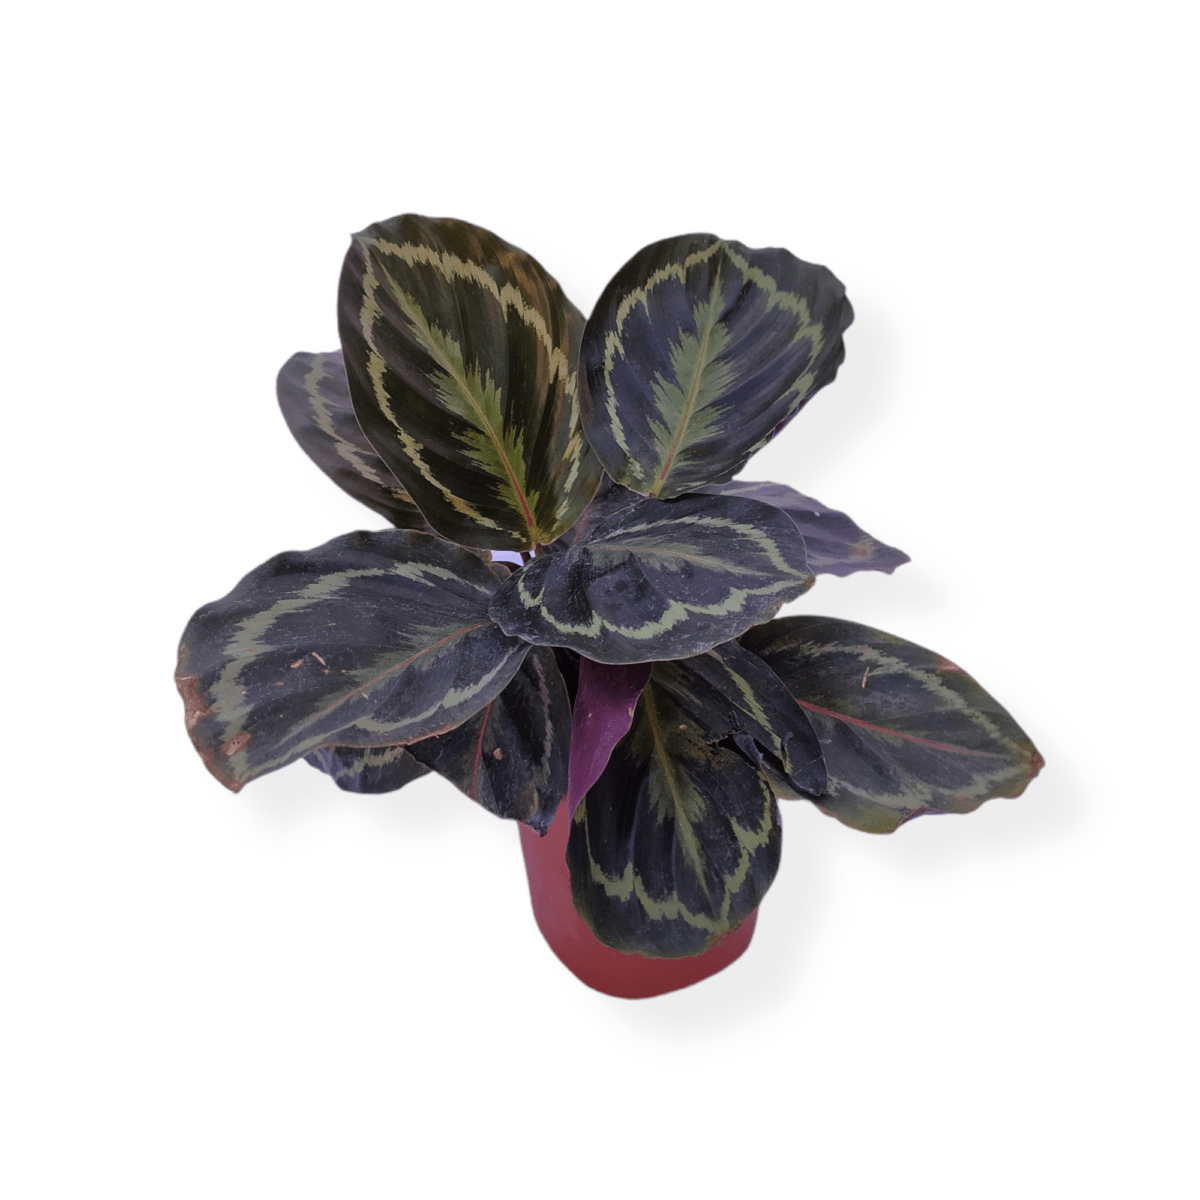 Calathea Roseopicta Plant From the Best Plant Nursery